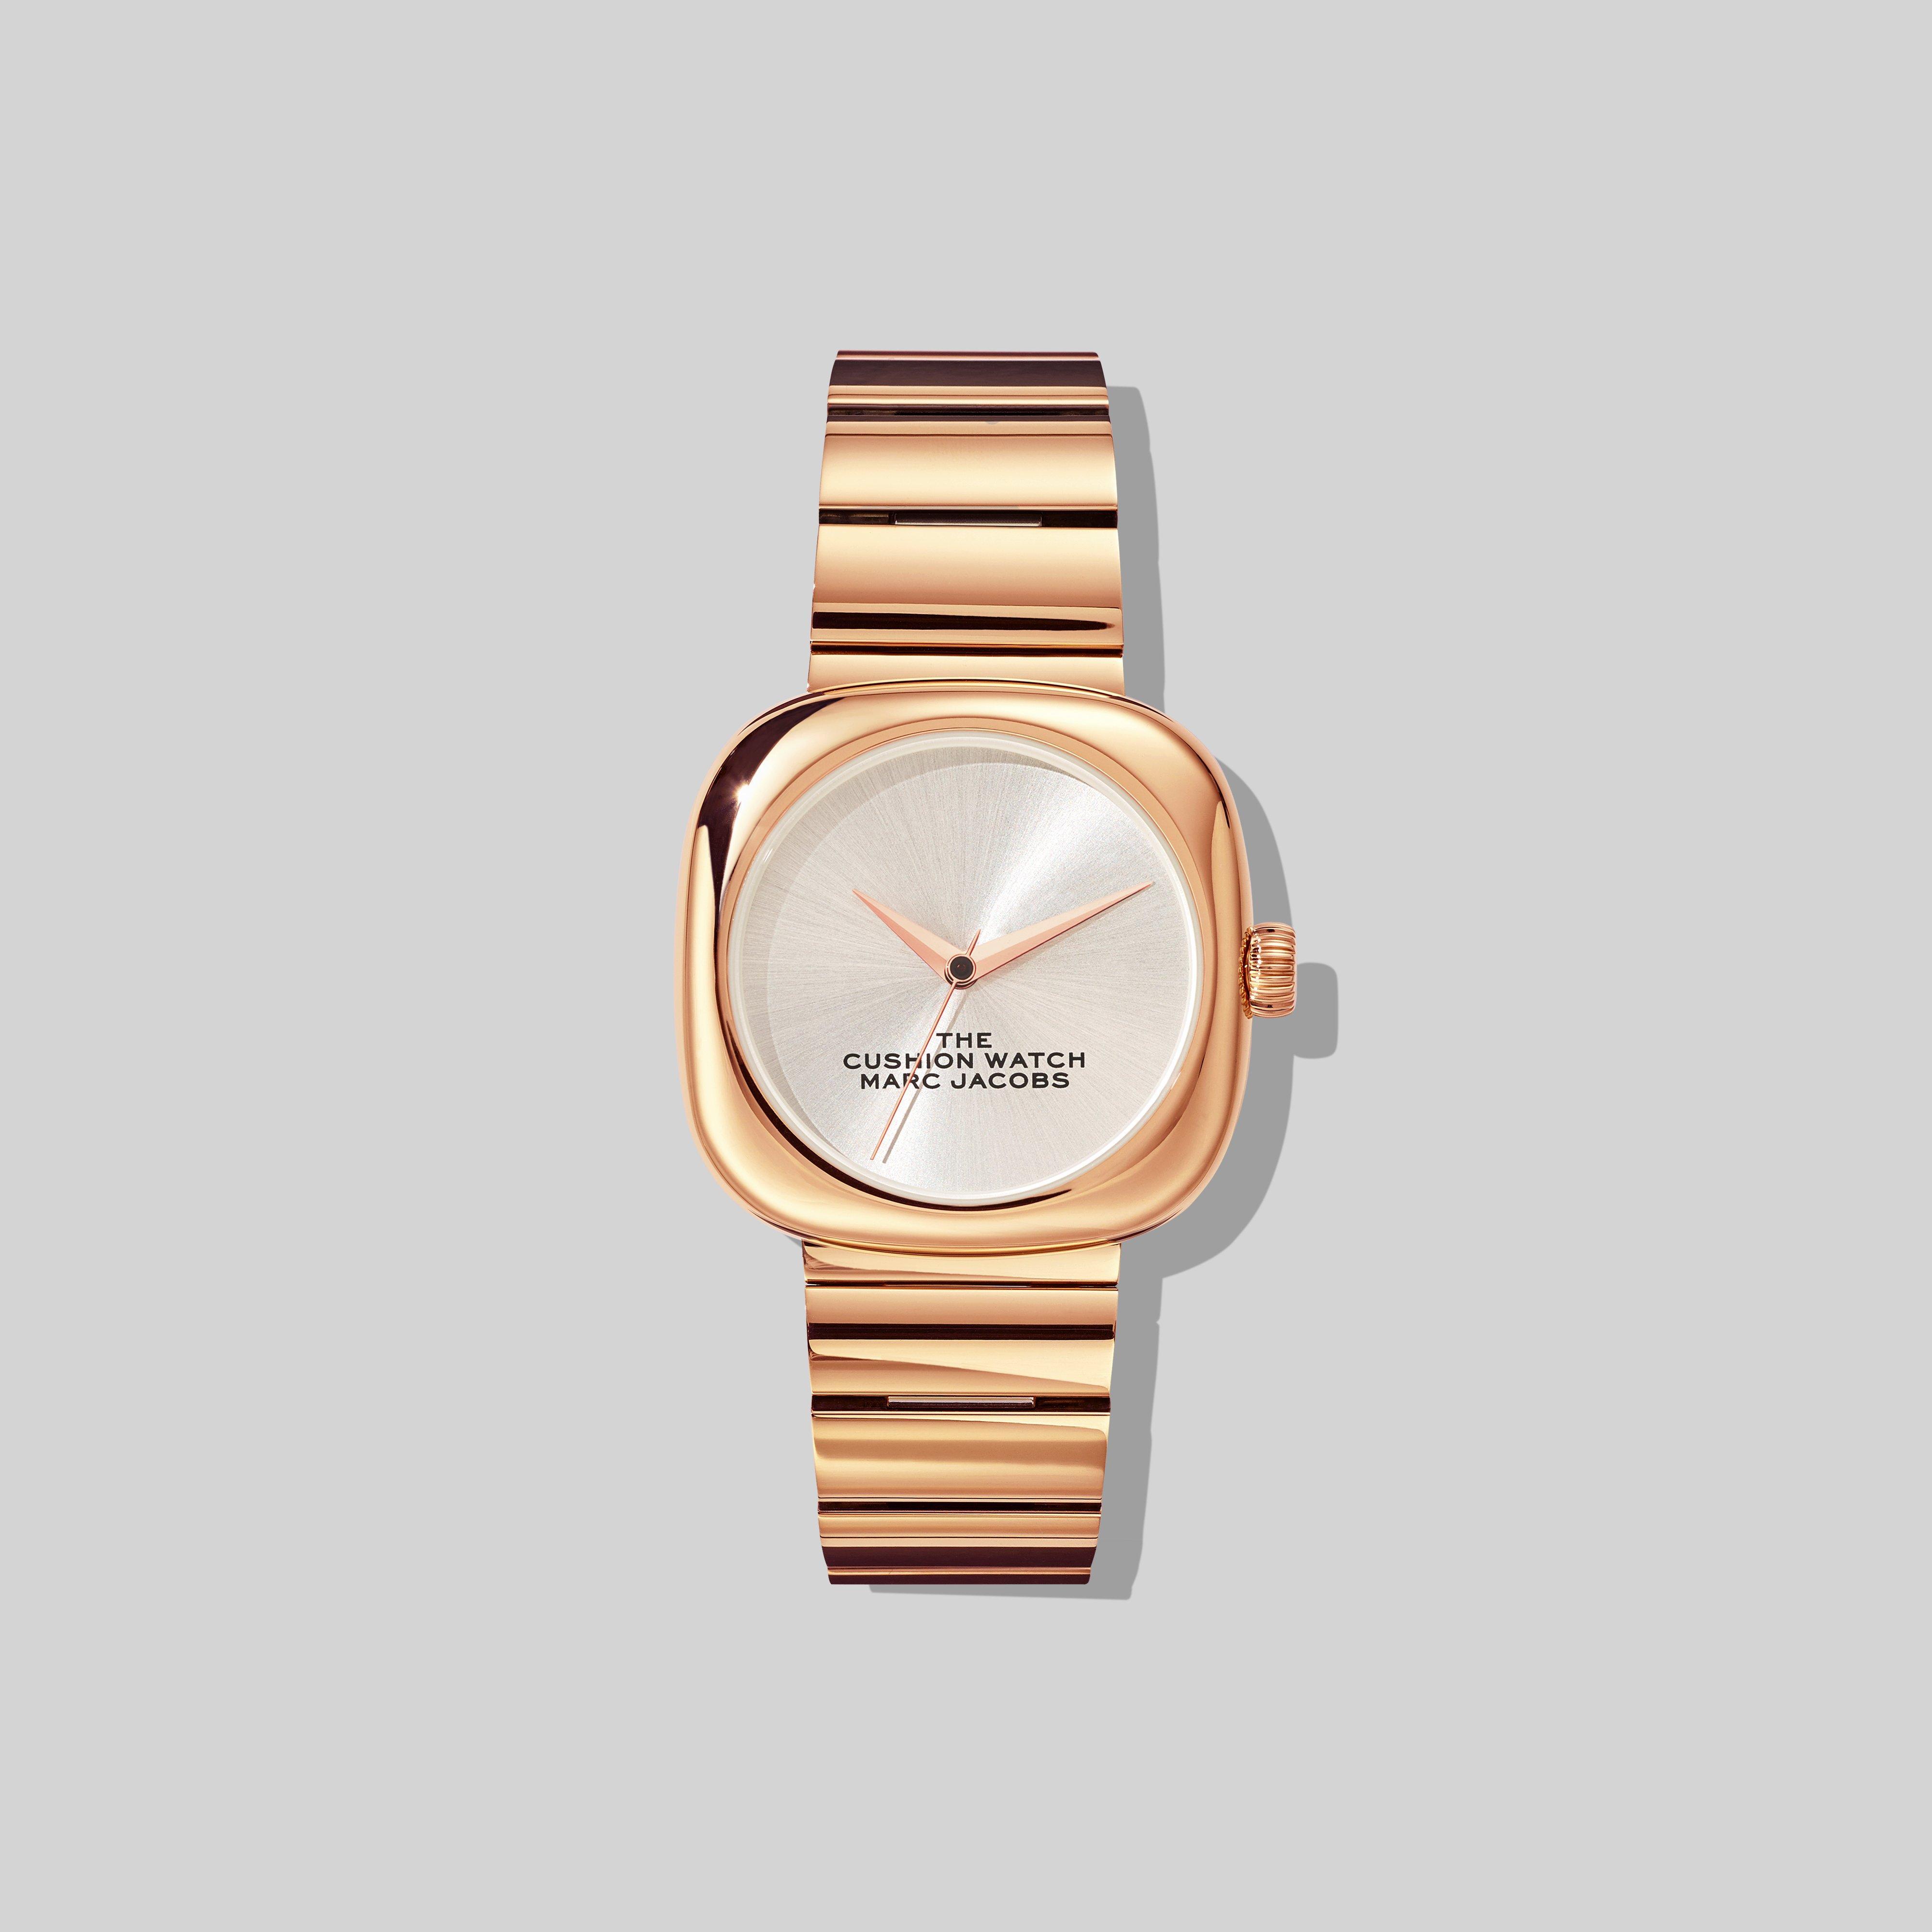 Marc Jacobs The Cushion Watch in Rose Gold (Metallic) - Lyst